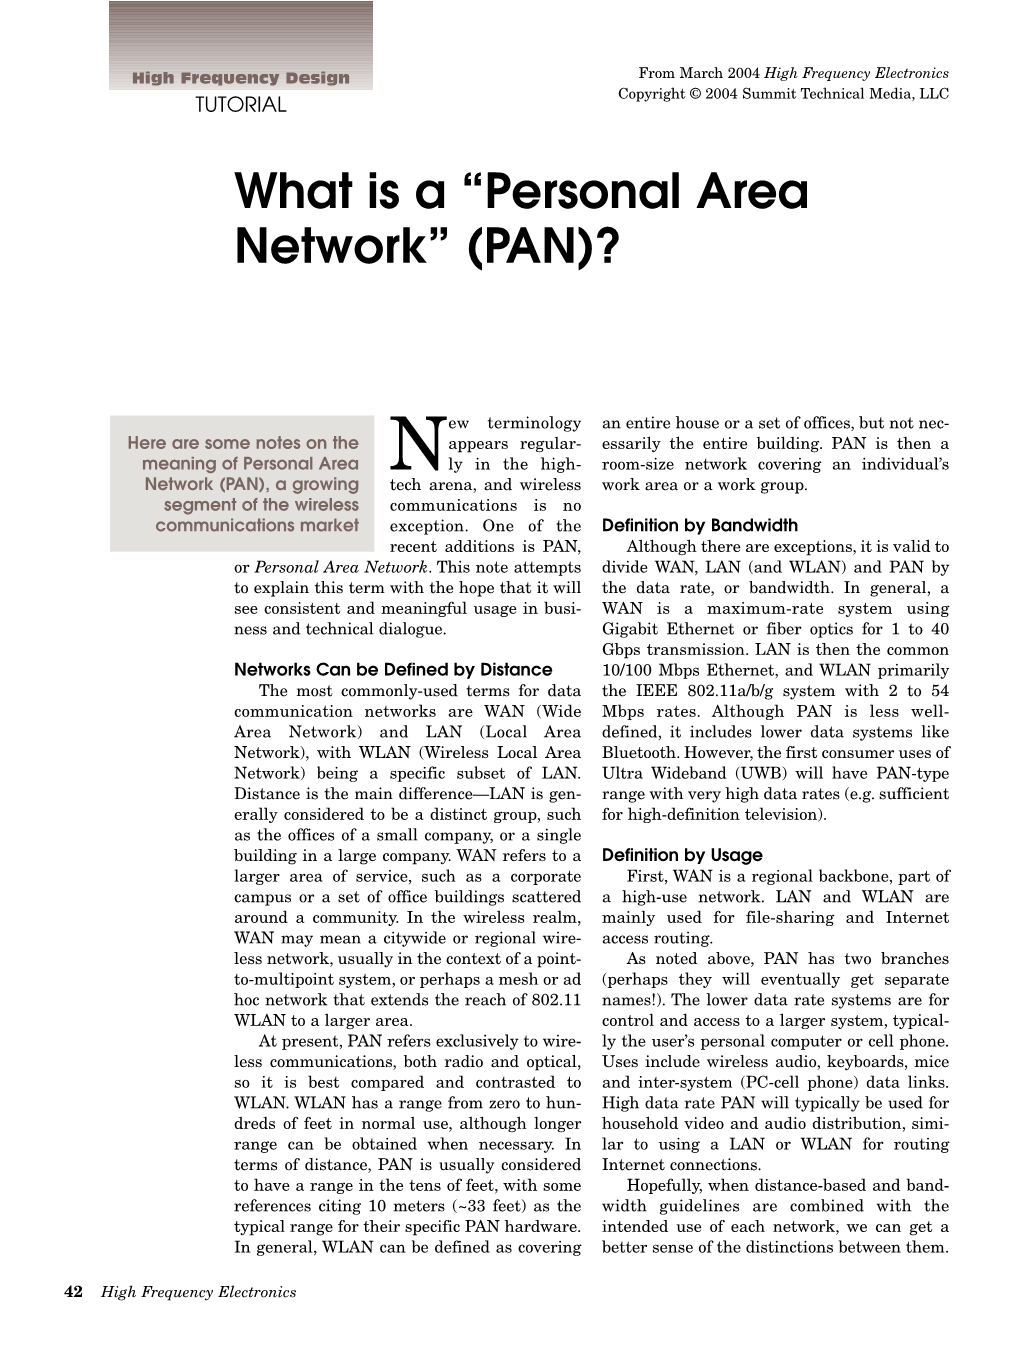 Personal Area Network” (PAN)?